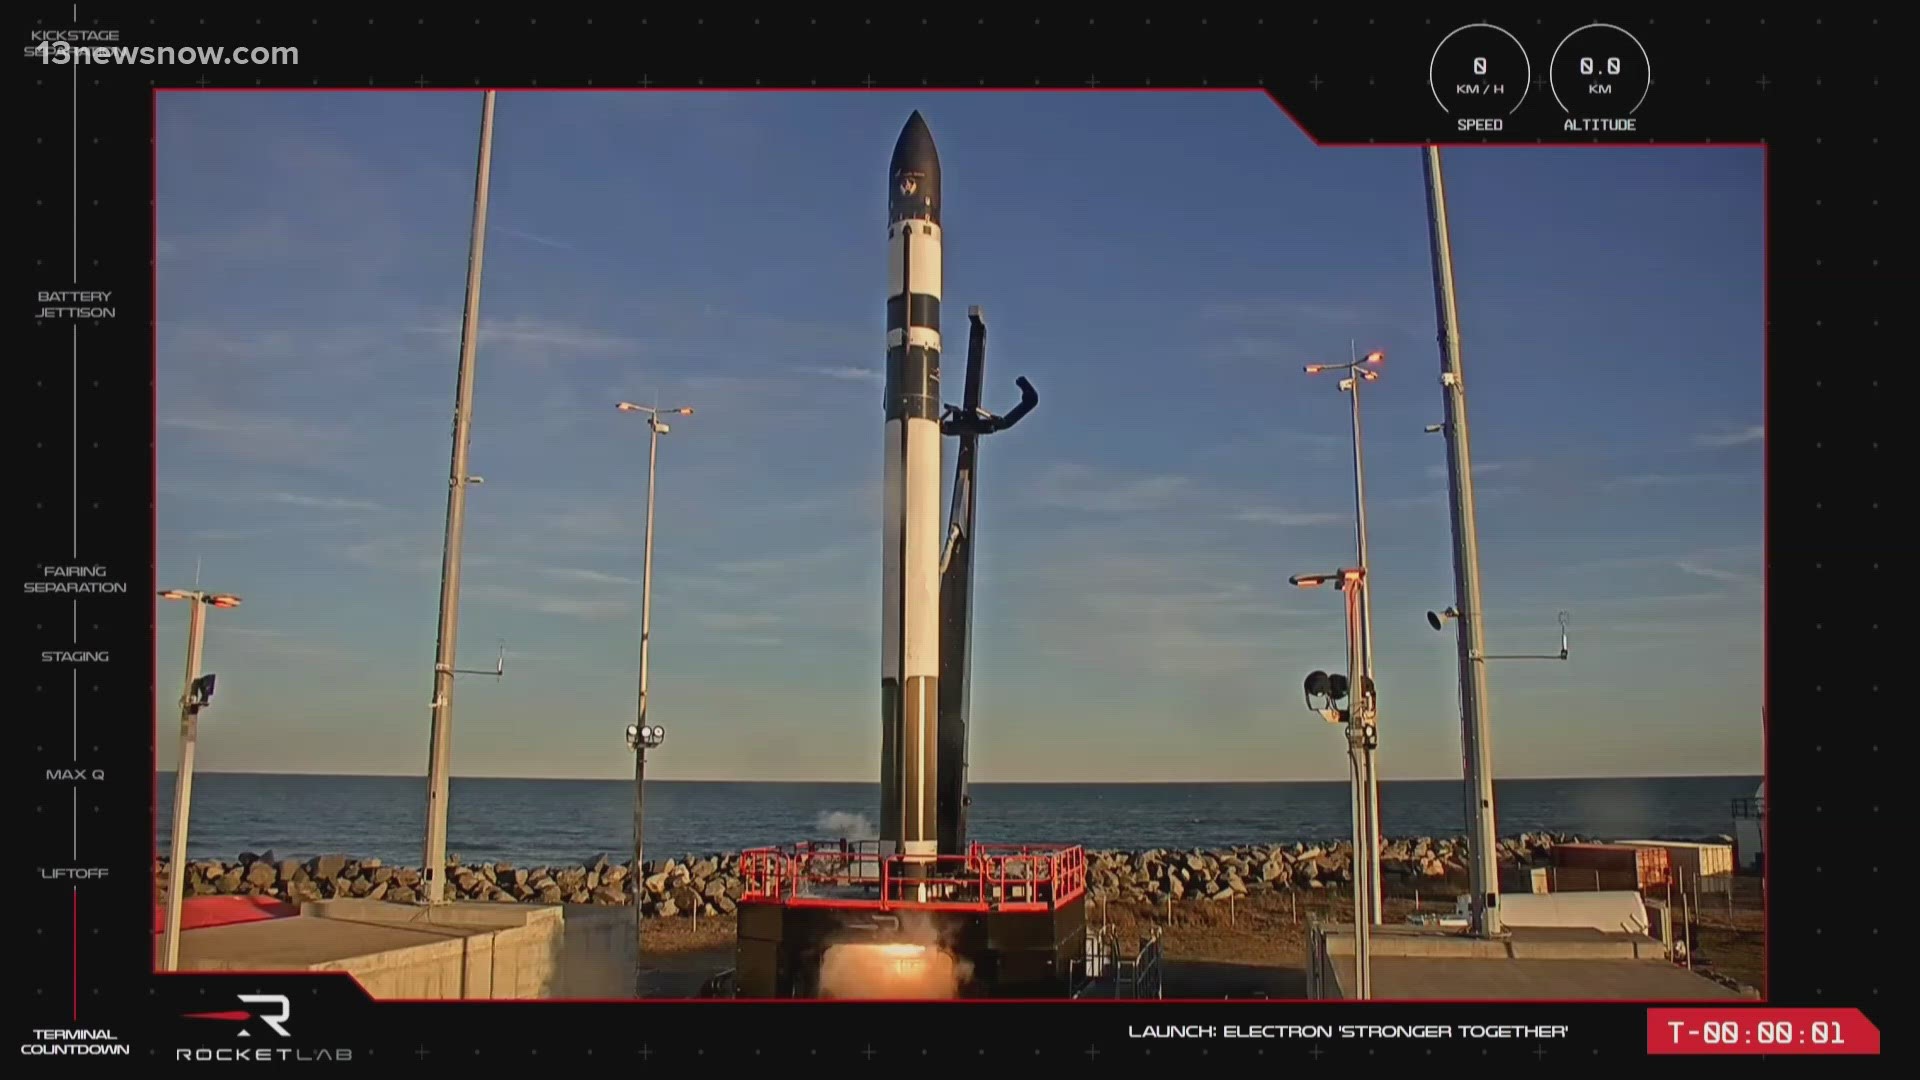 Rocket Lab said Thursday's mission is "a dedicated launch for satellite manufacturer and Earth observation company Capella Space."